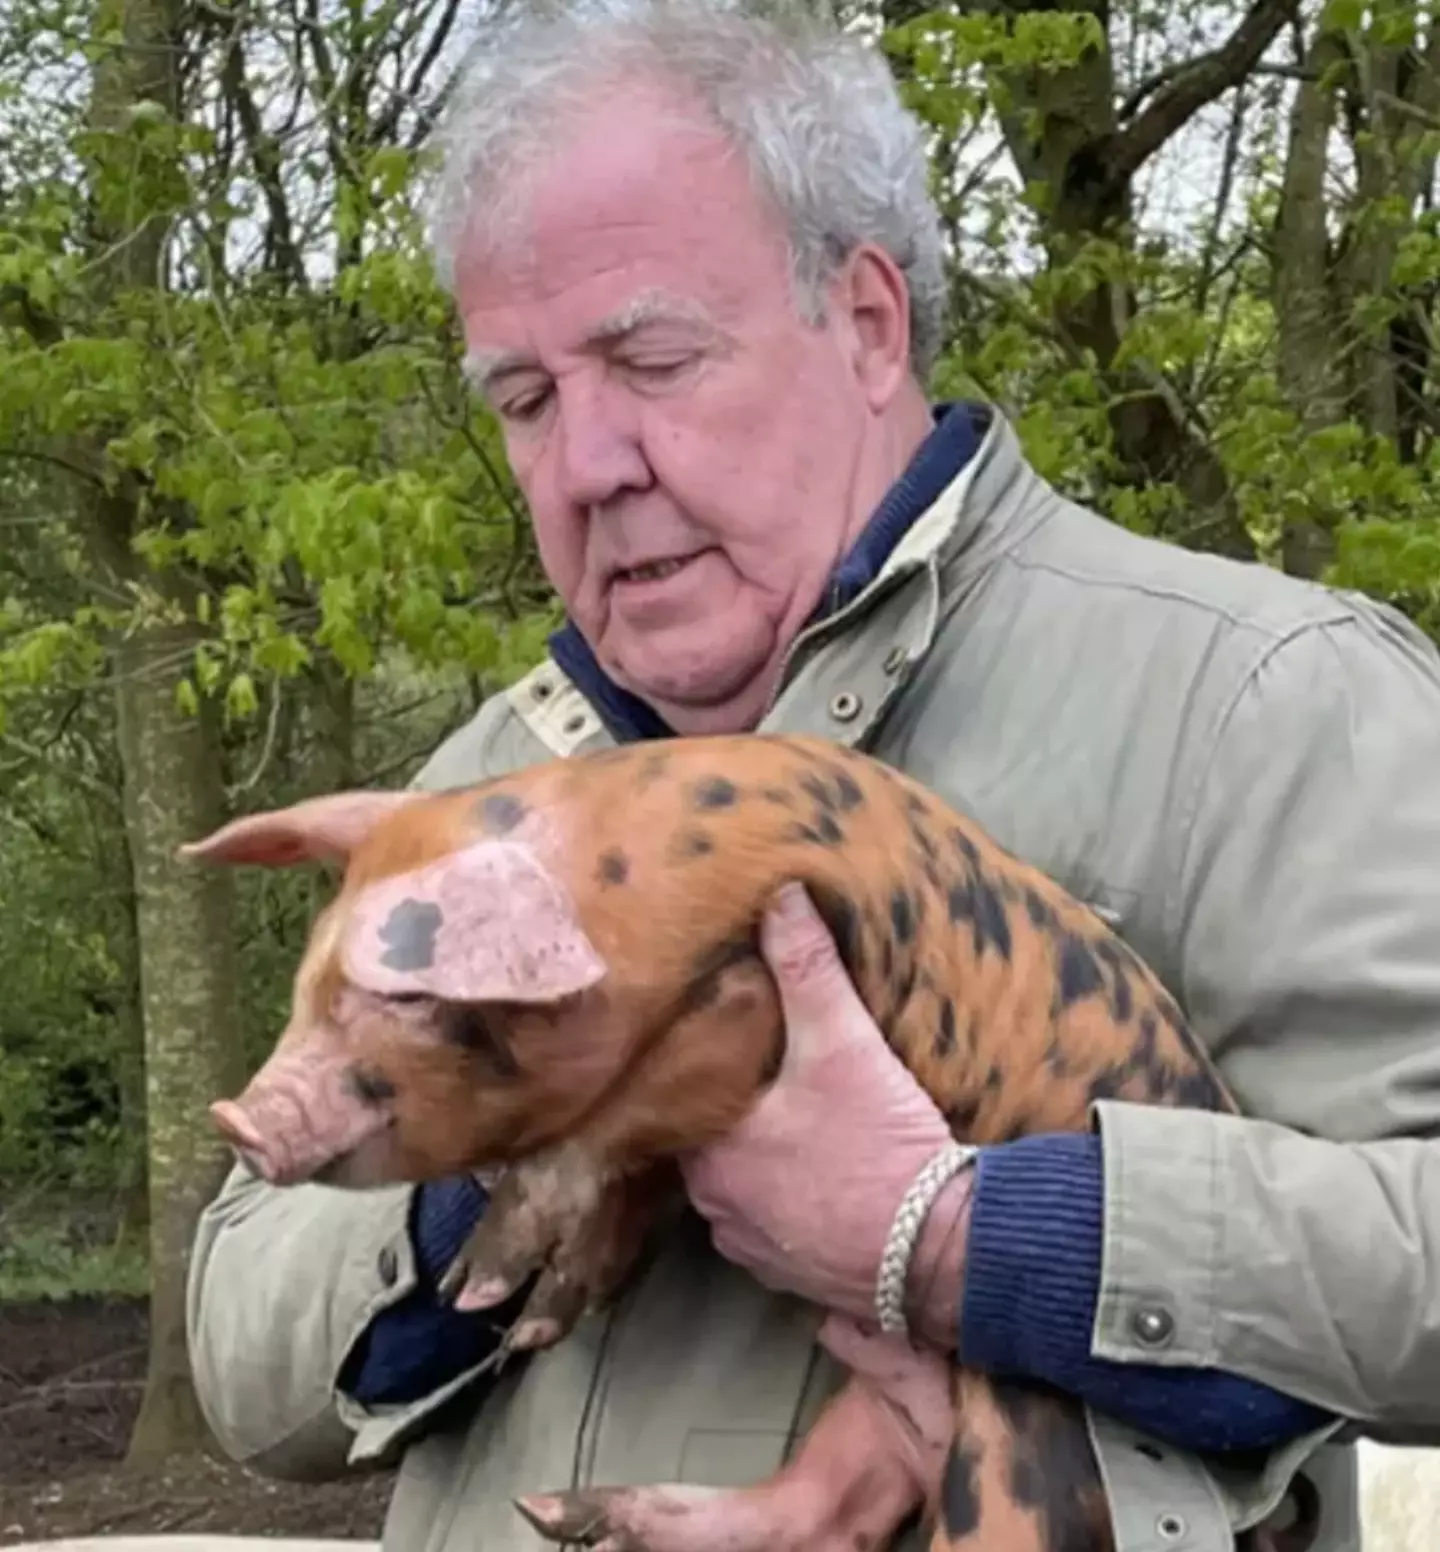 The newborn piglets are a big part of episode four of the show. (LADBible)